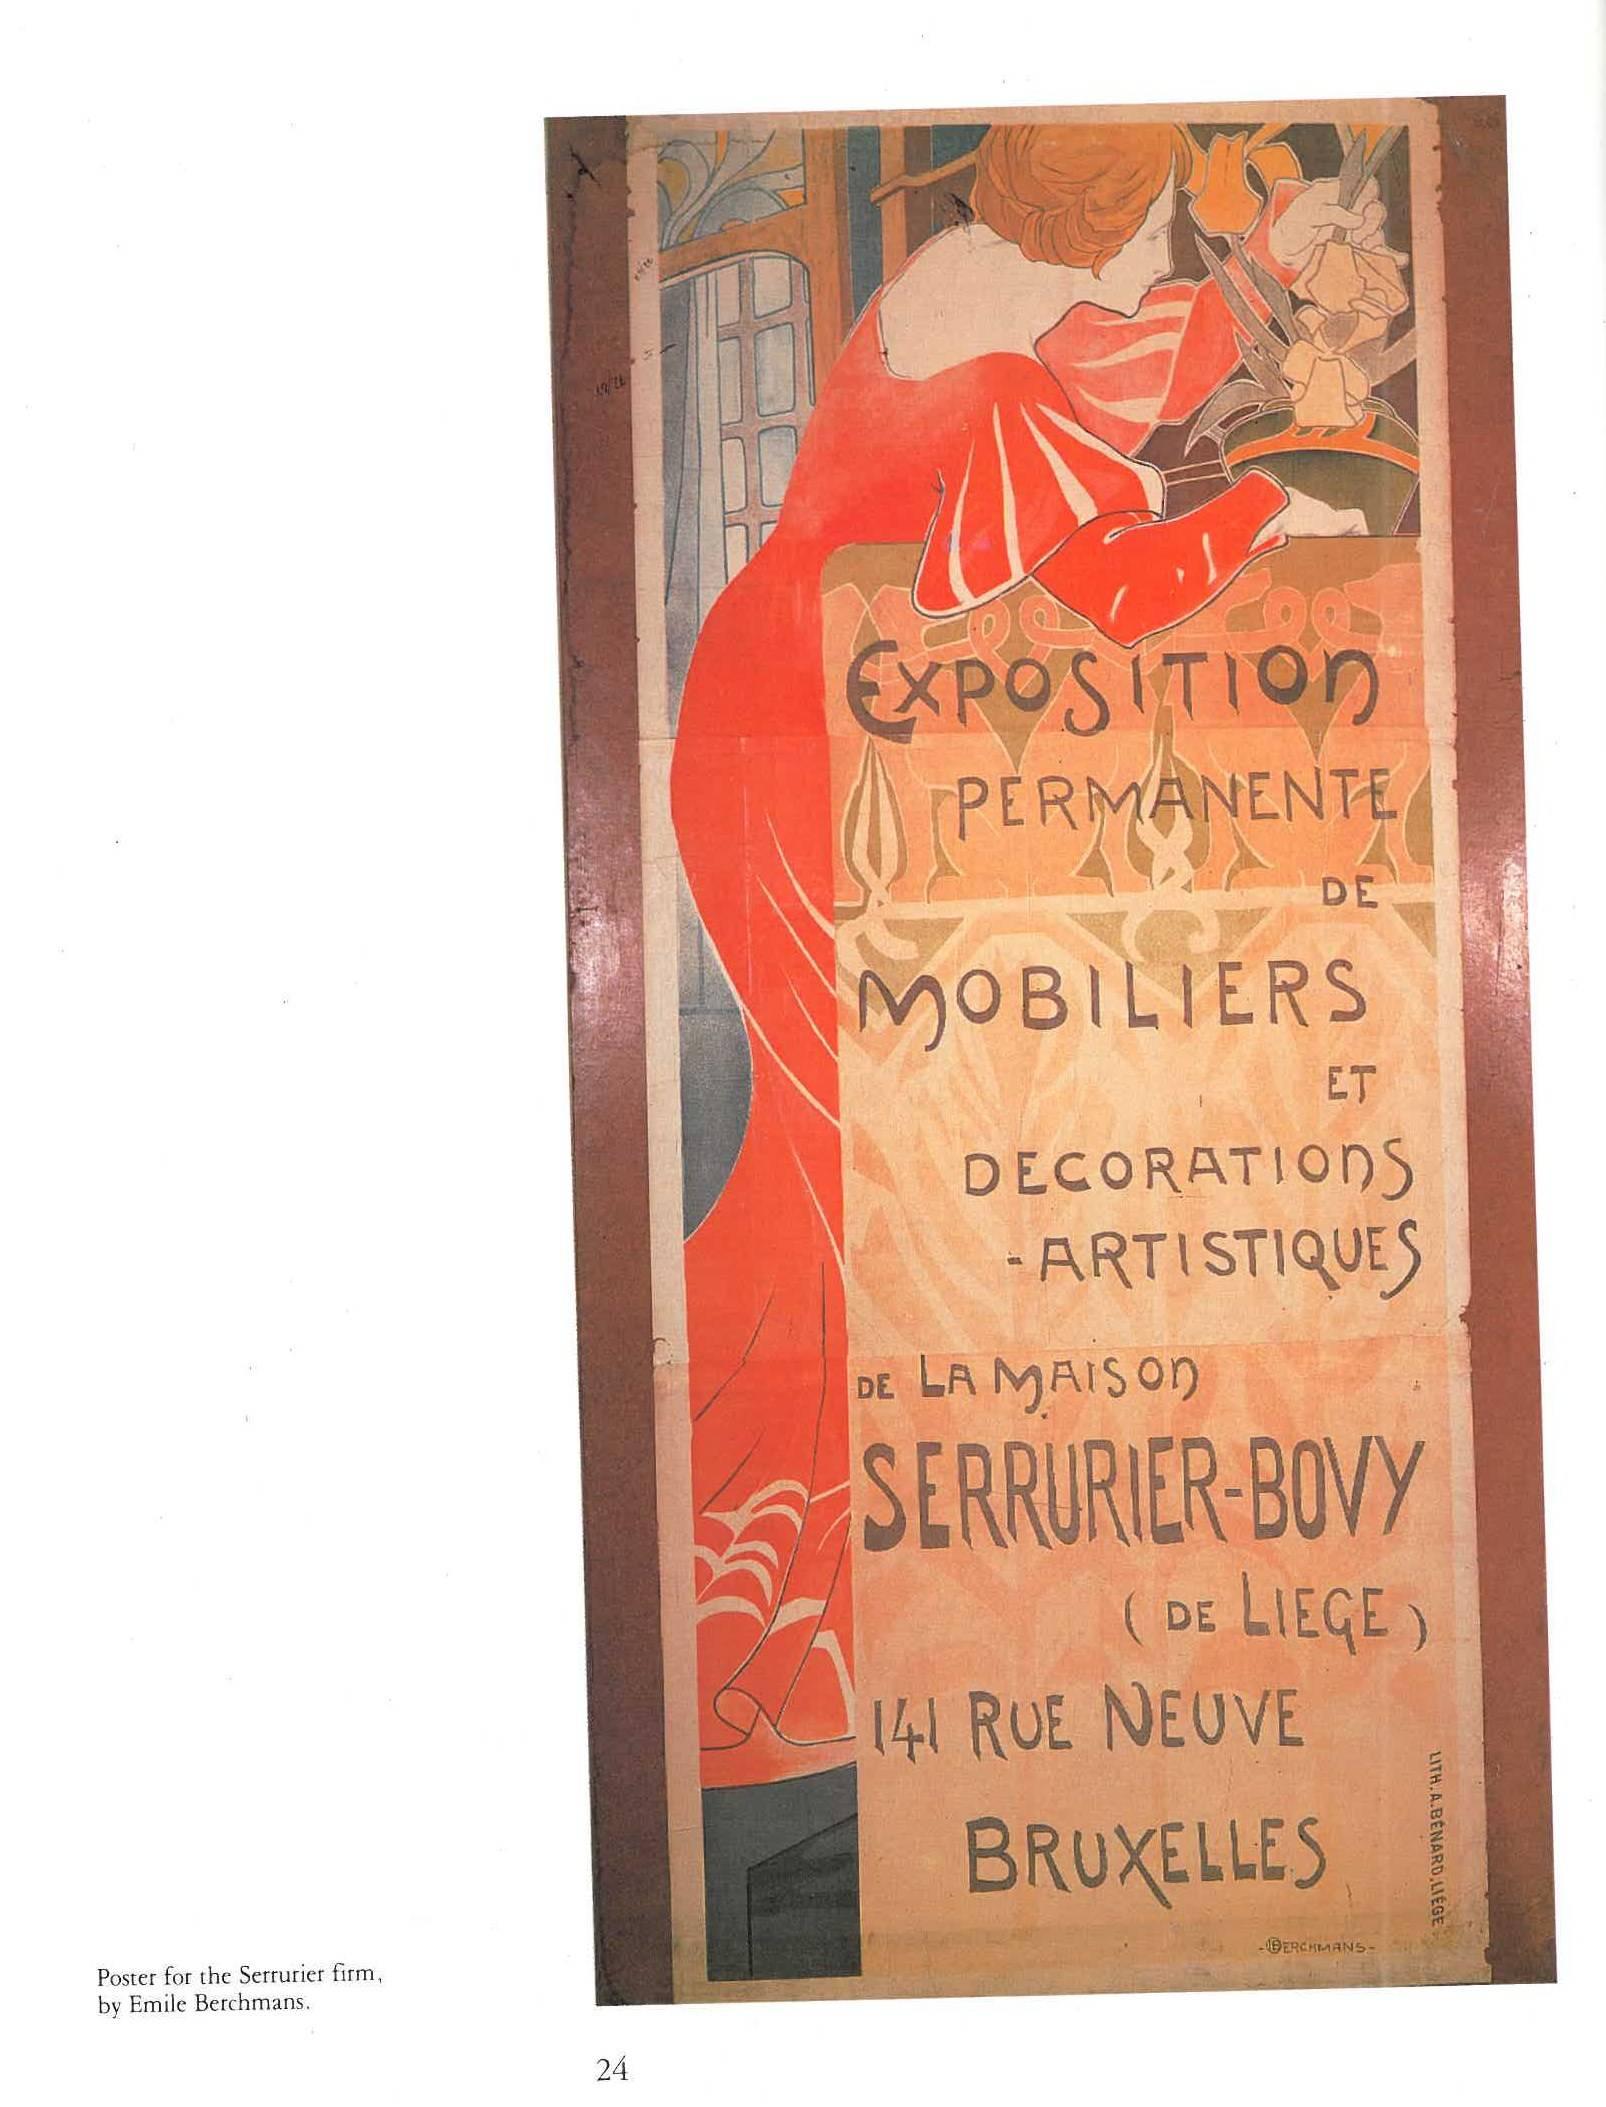 Serrurier-Bovy was a Belgium born Architect and Furniture designer who has been credited as being one of the founding fathers of the Art Nouveau style. This book is a photographic documentary with commentary tracing his works. The early years of his